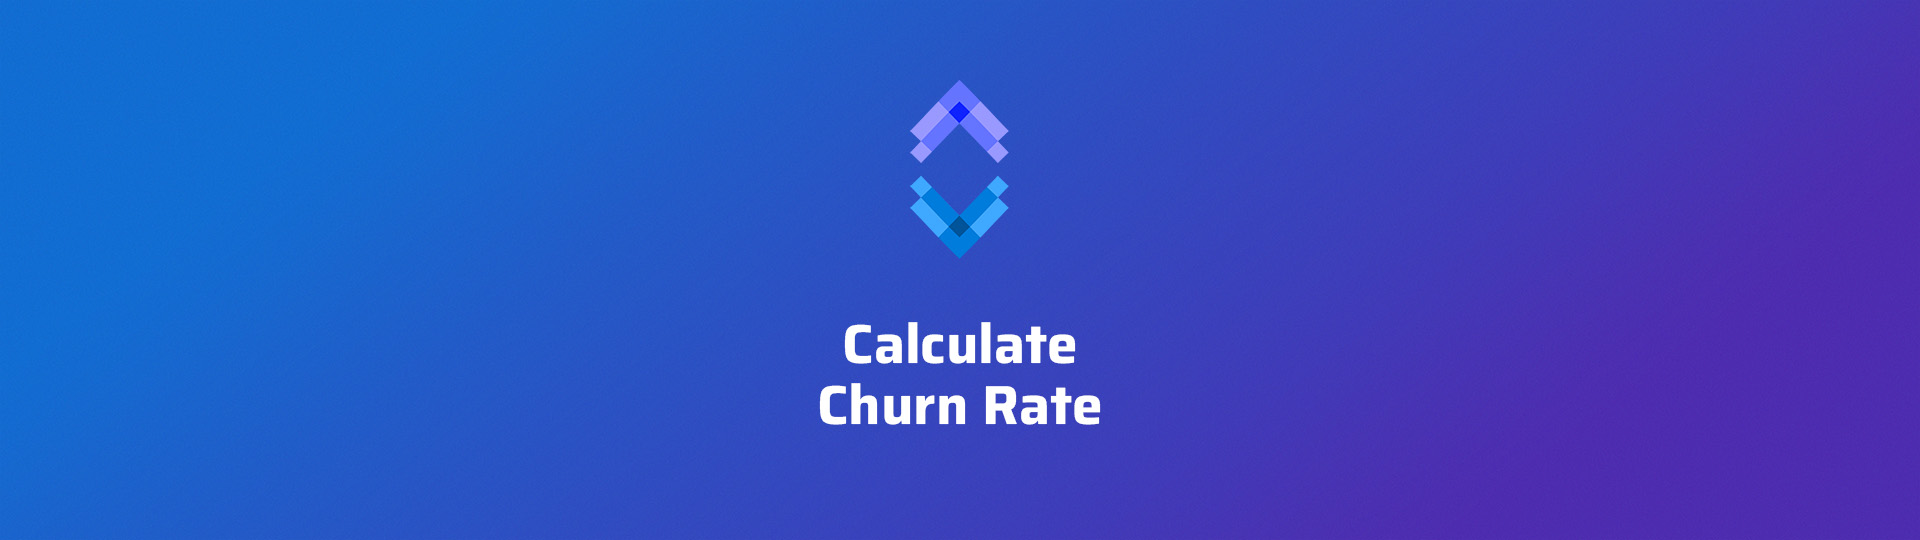 Easily Calculate Churn Rate for SaaS